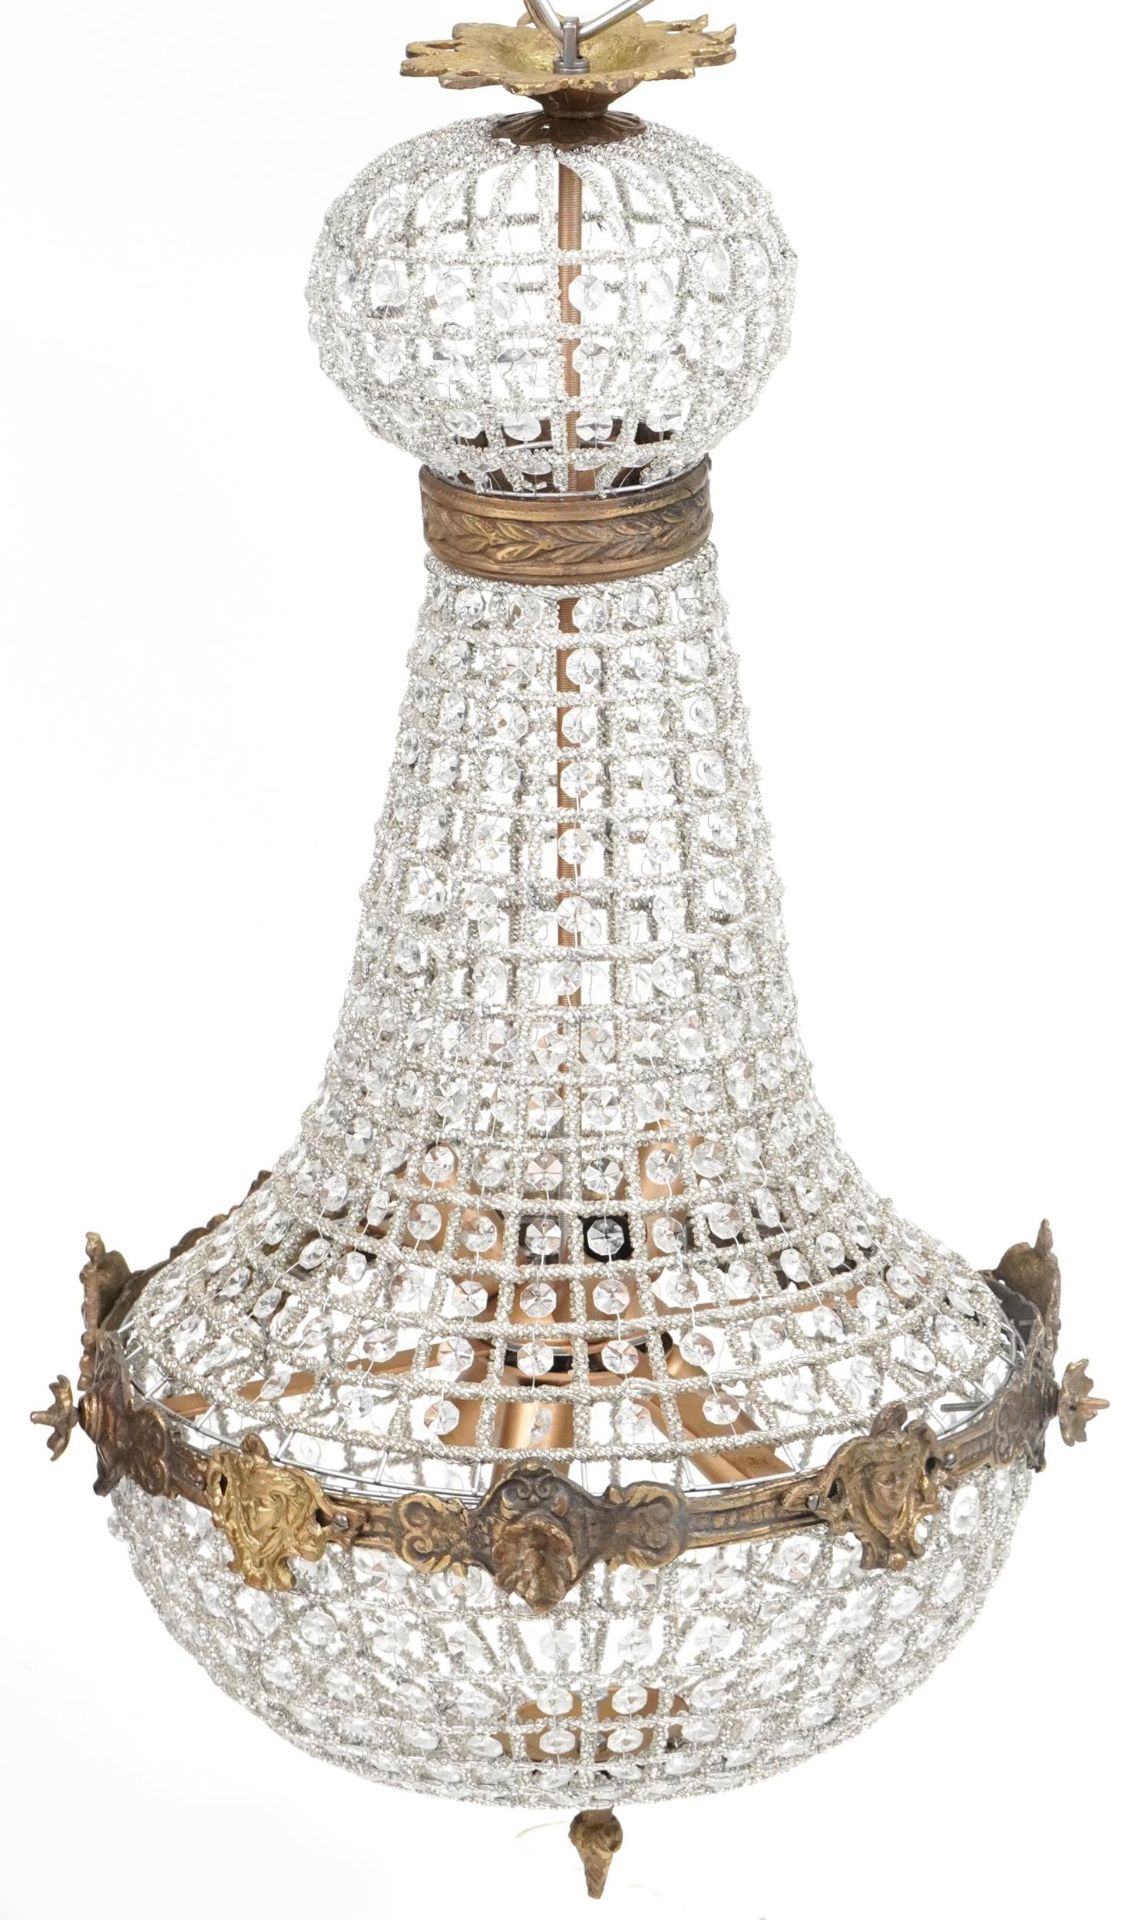 Ornate chandelier with brass mounts, 75cm high - Image 2 of 2